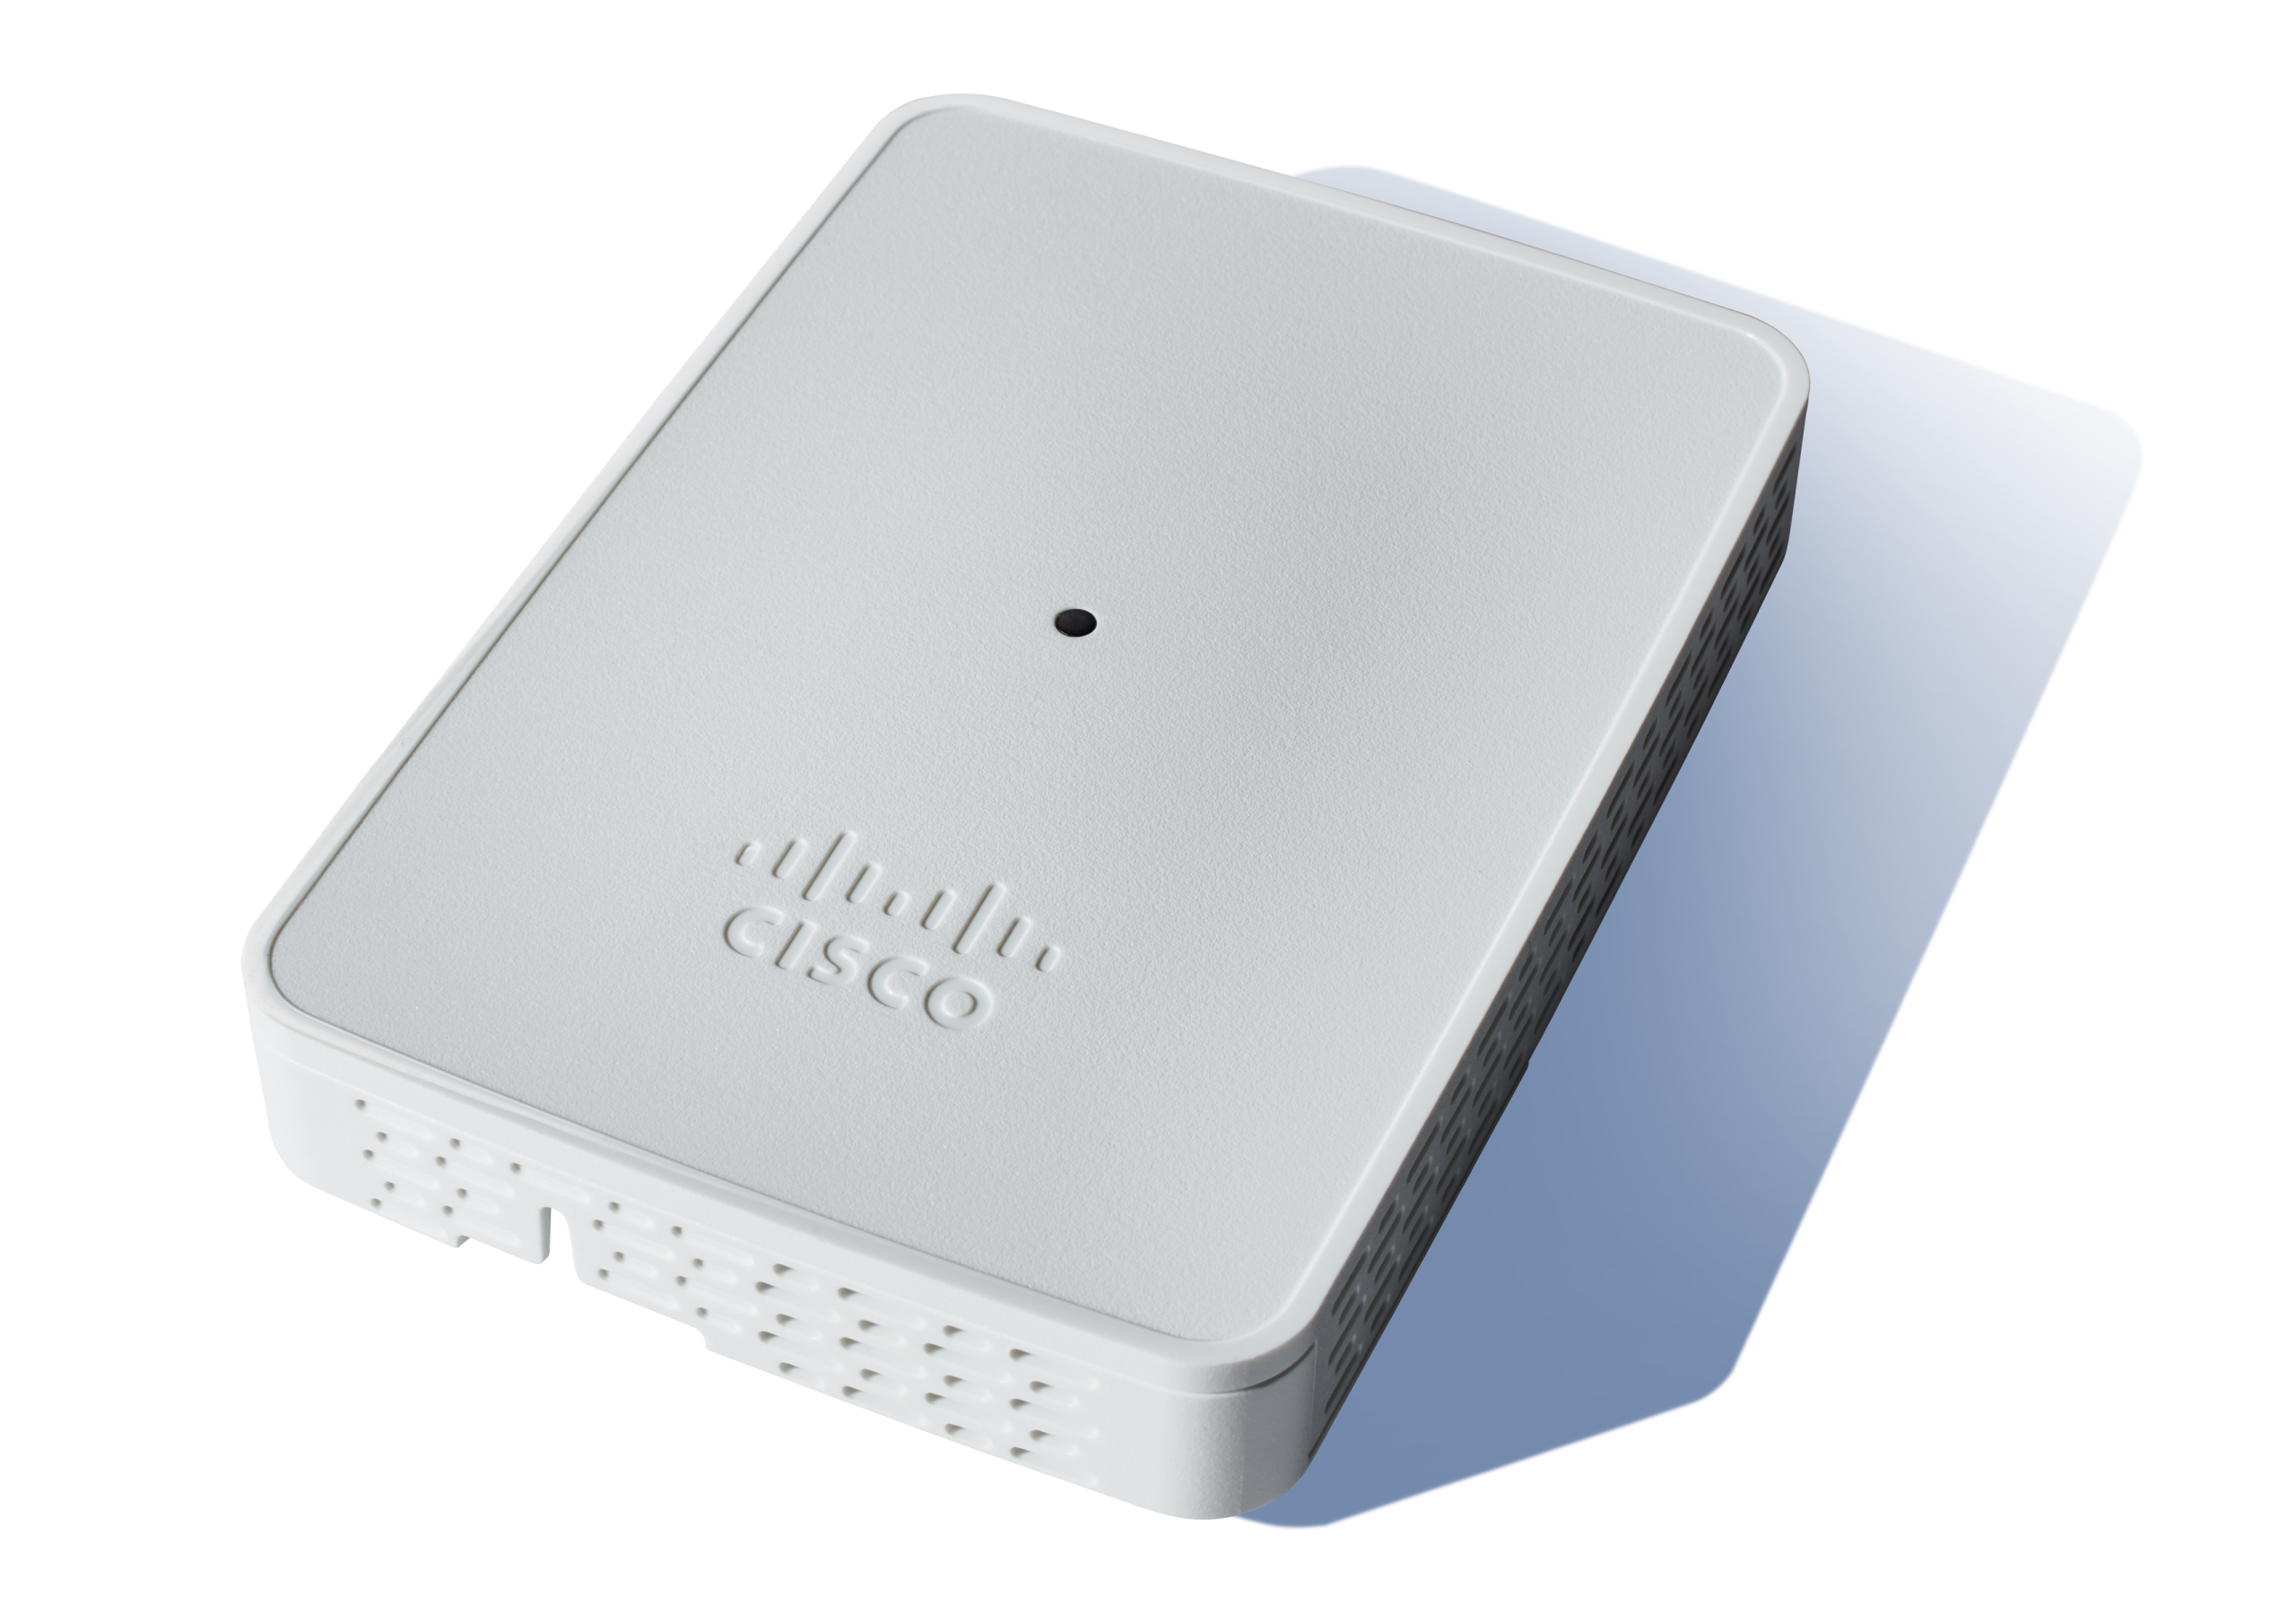 Picture of Cisco 143ACM IEEE 802.11ac 867 Mbit/s Wireless Range Extender - 2.40 GHz, 5 GHz - MIMO Technology - 1 x Network (RJ-45) - Ethernet - Wall Mountable